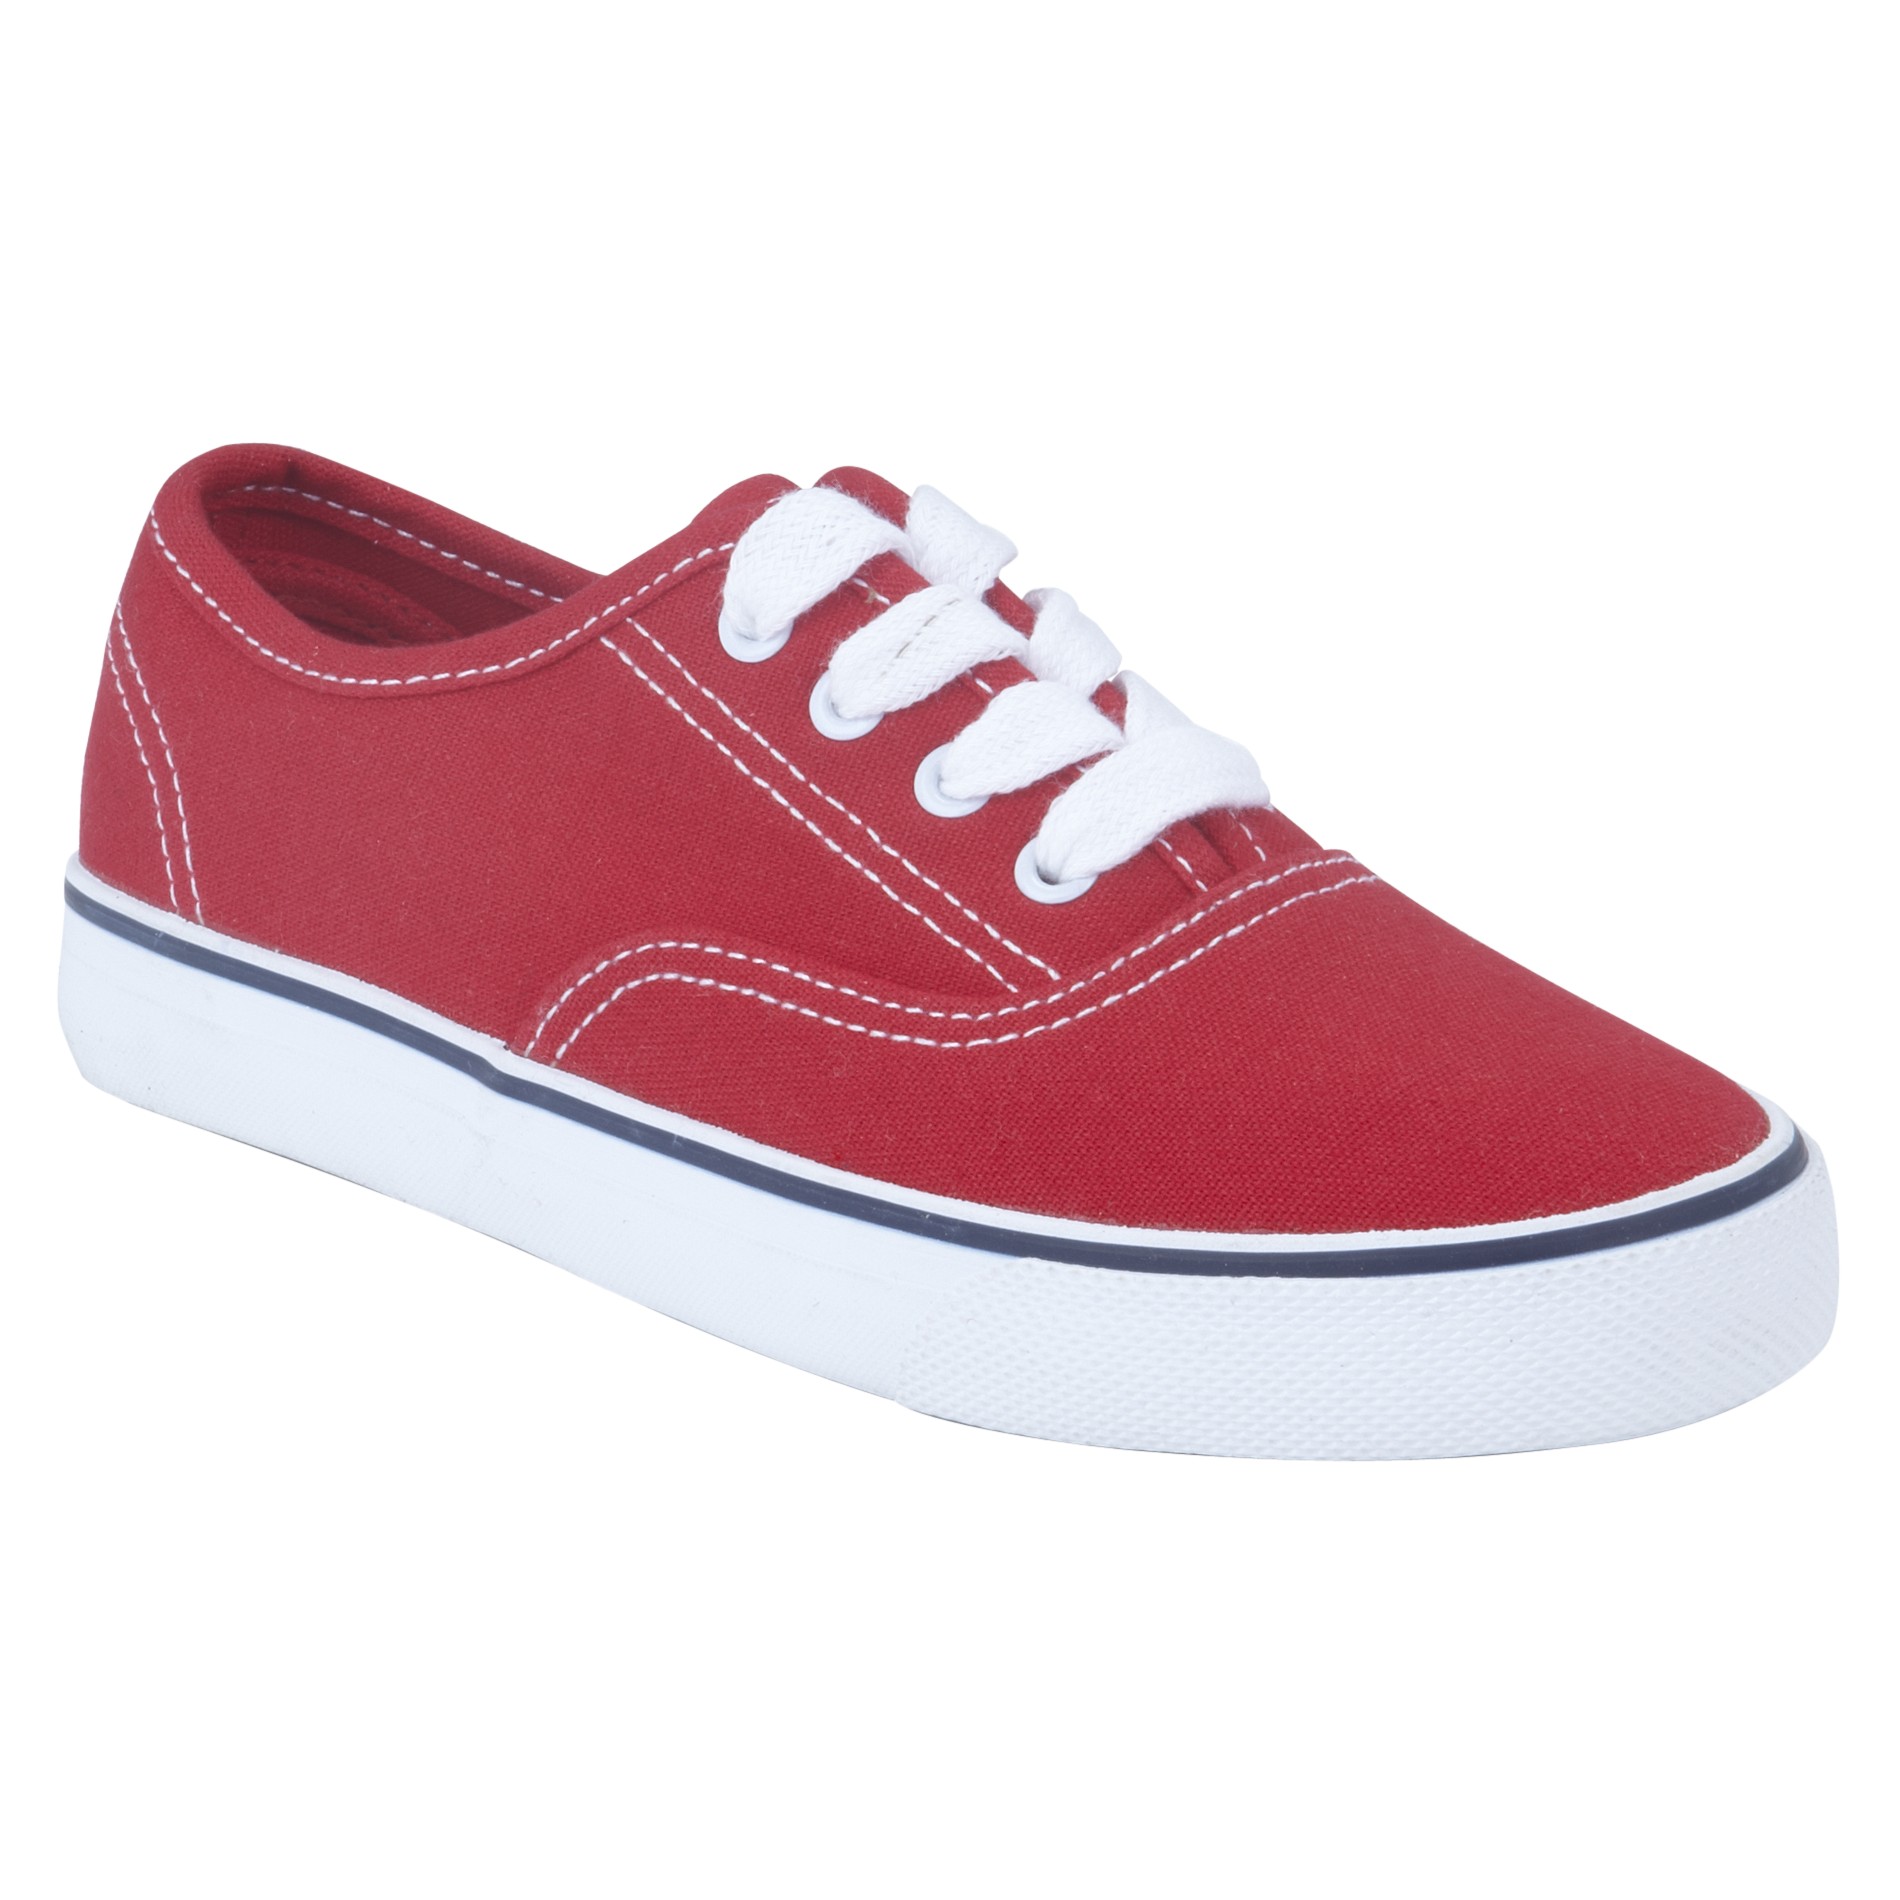 Joe Boxer Youth's Casual Reverse - Red